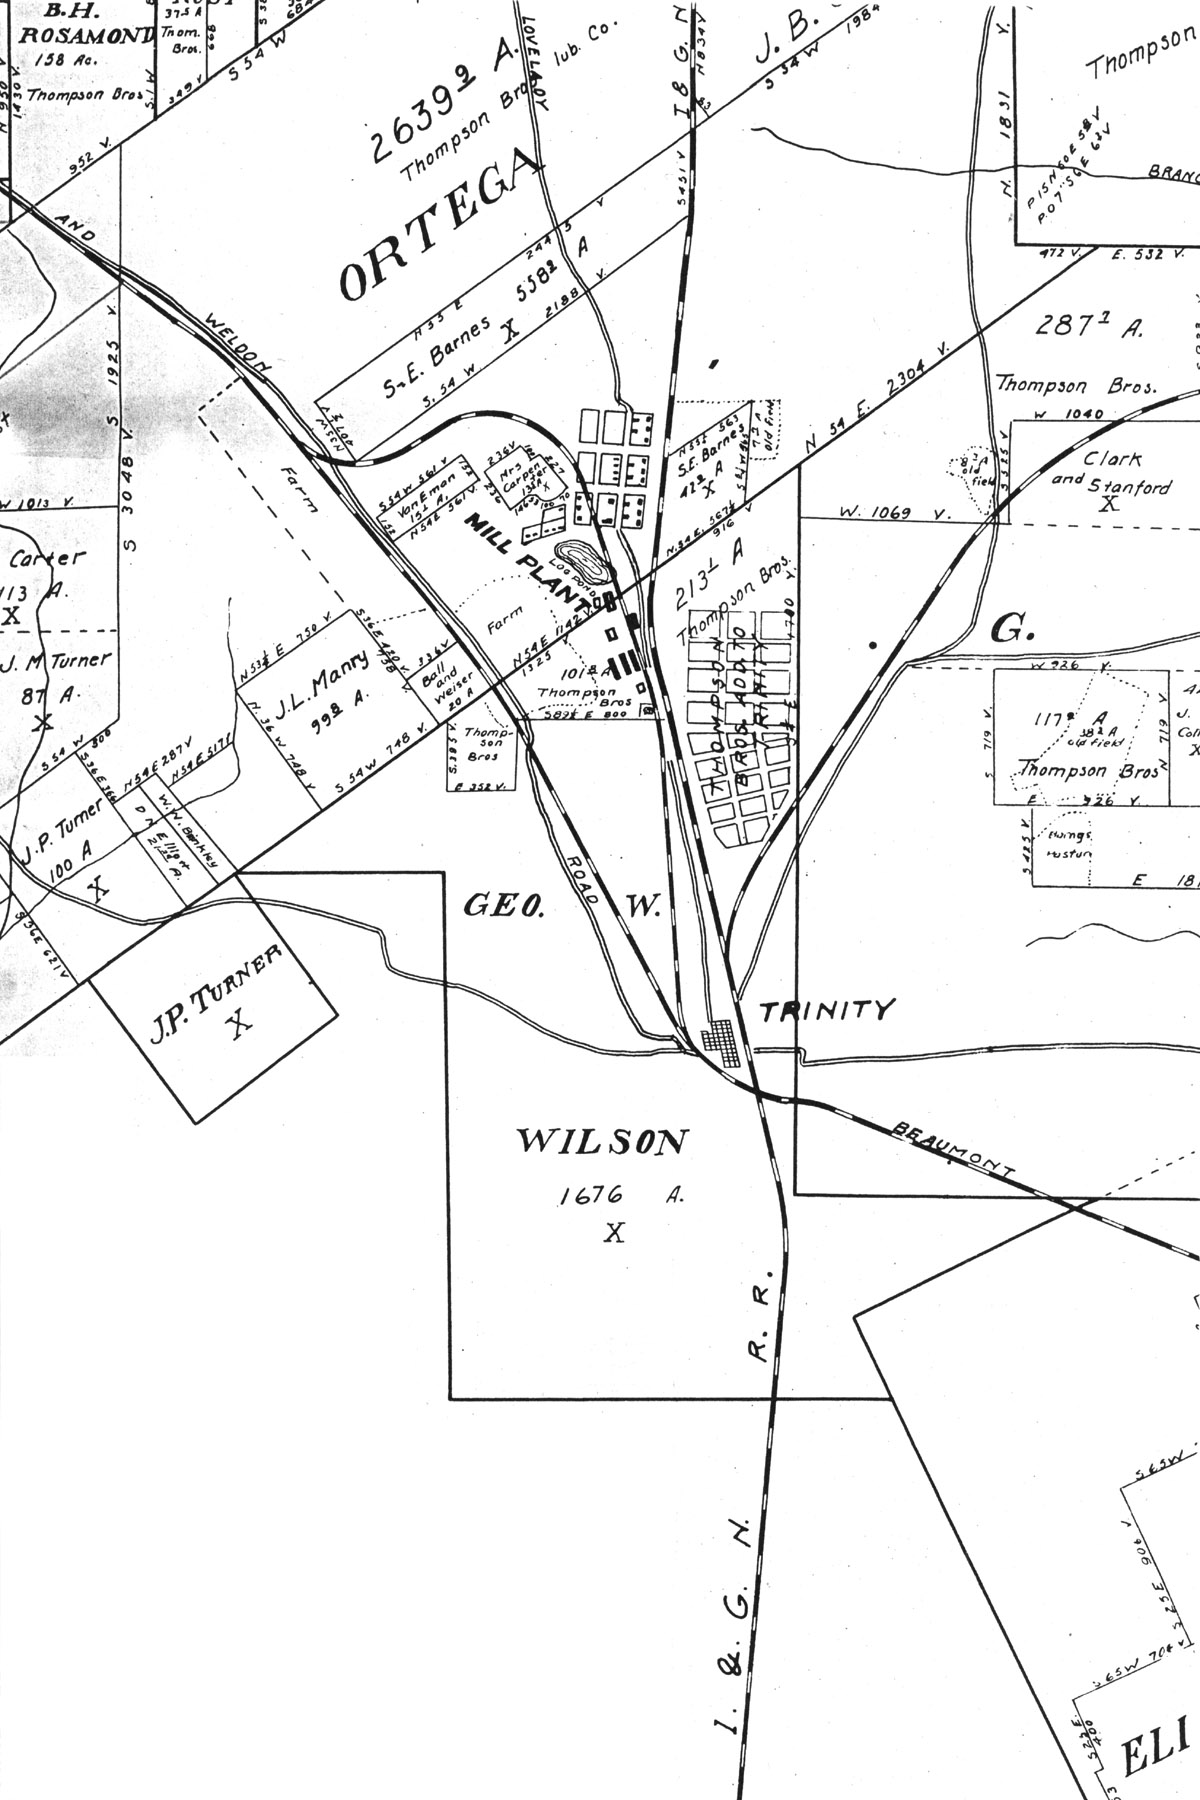 Thompson Brothers Lumber Company (Tex.), Plat Map Showing Industrial Tracks at Trinity, Texas. Undated.